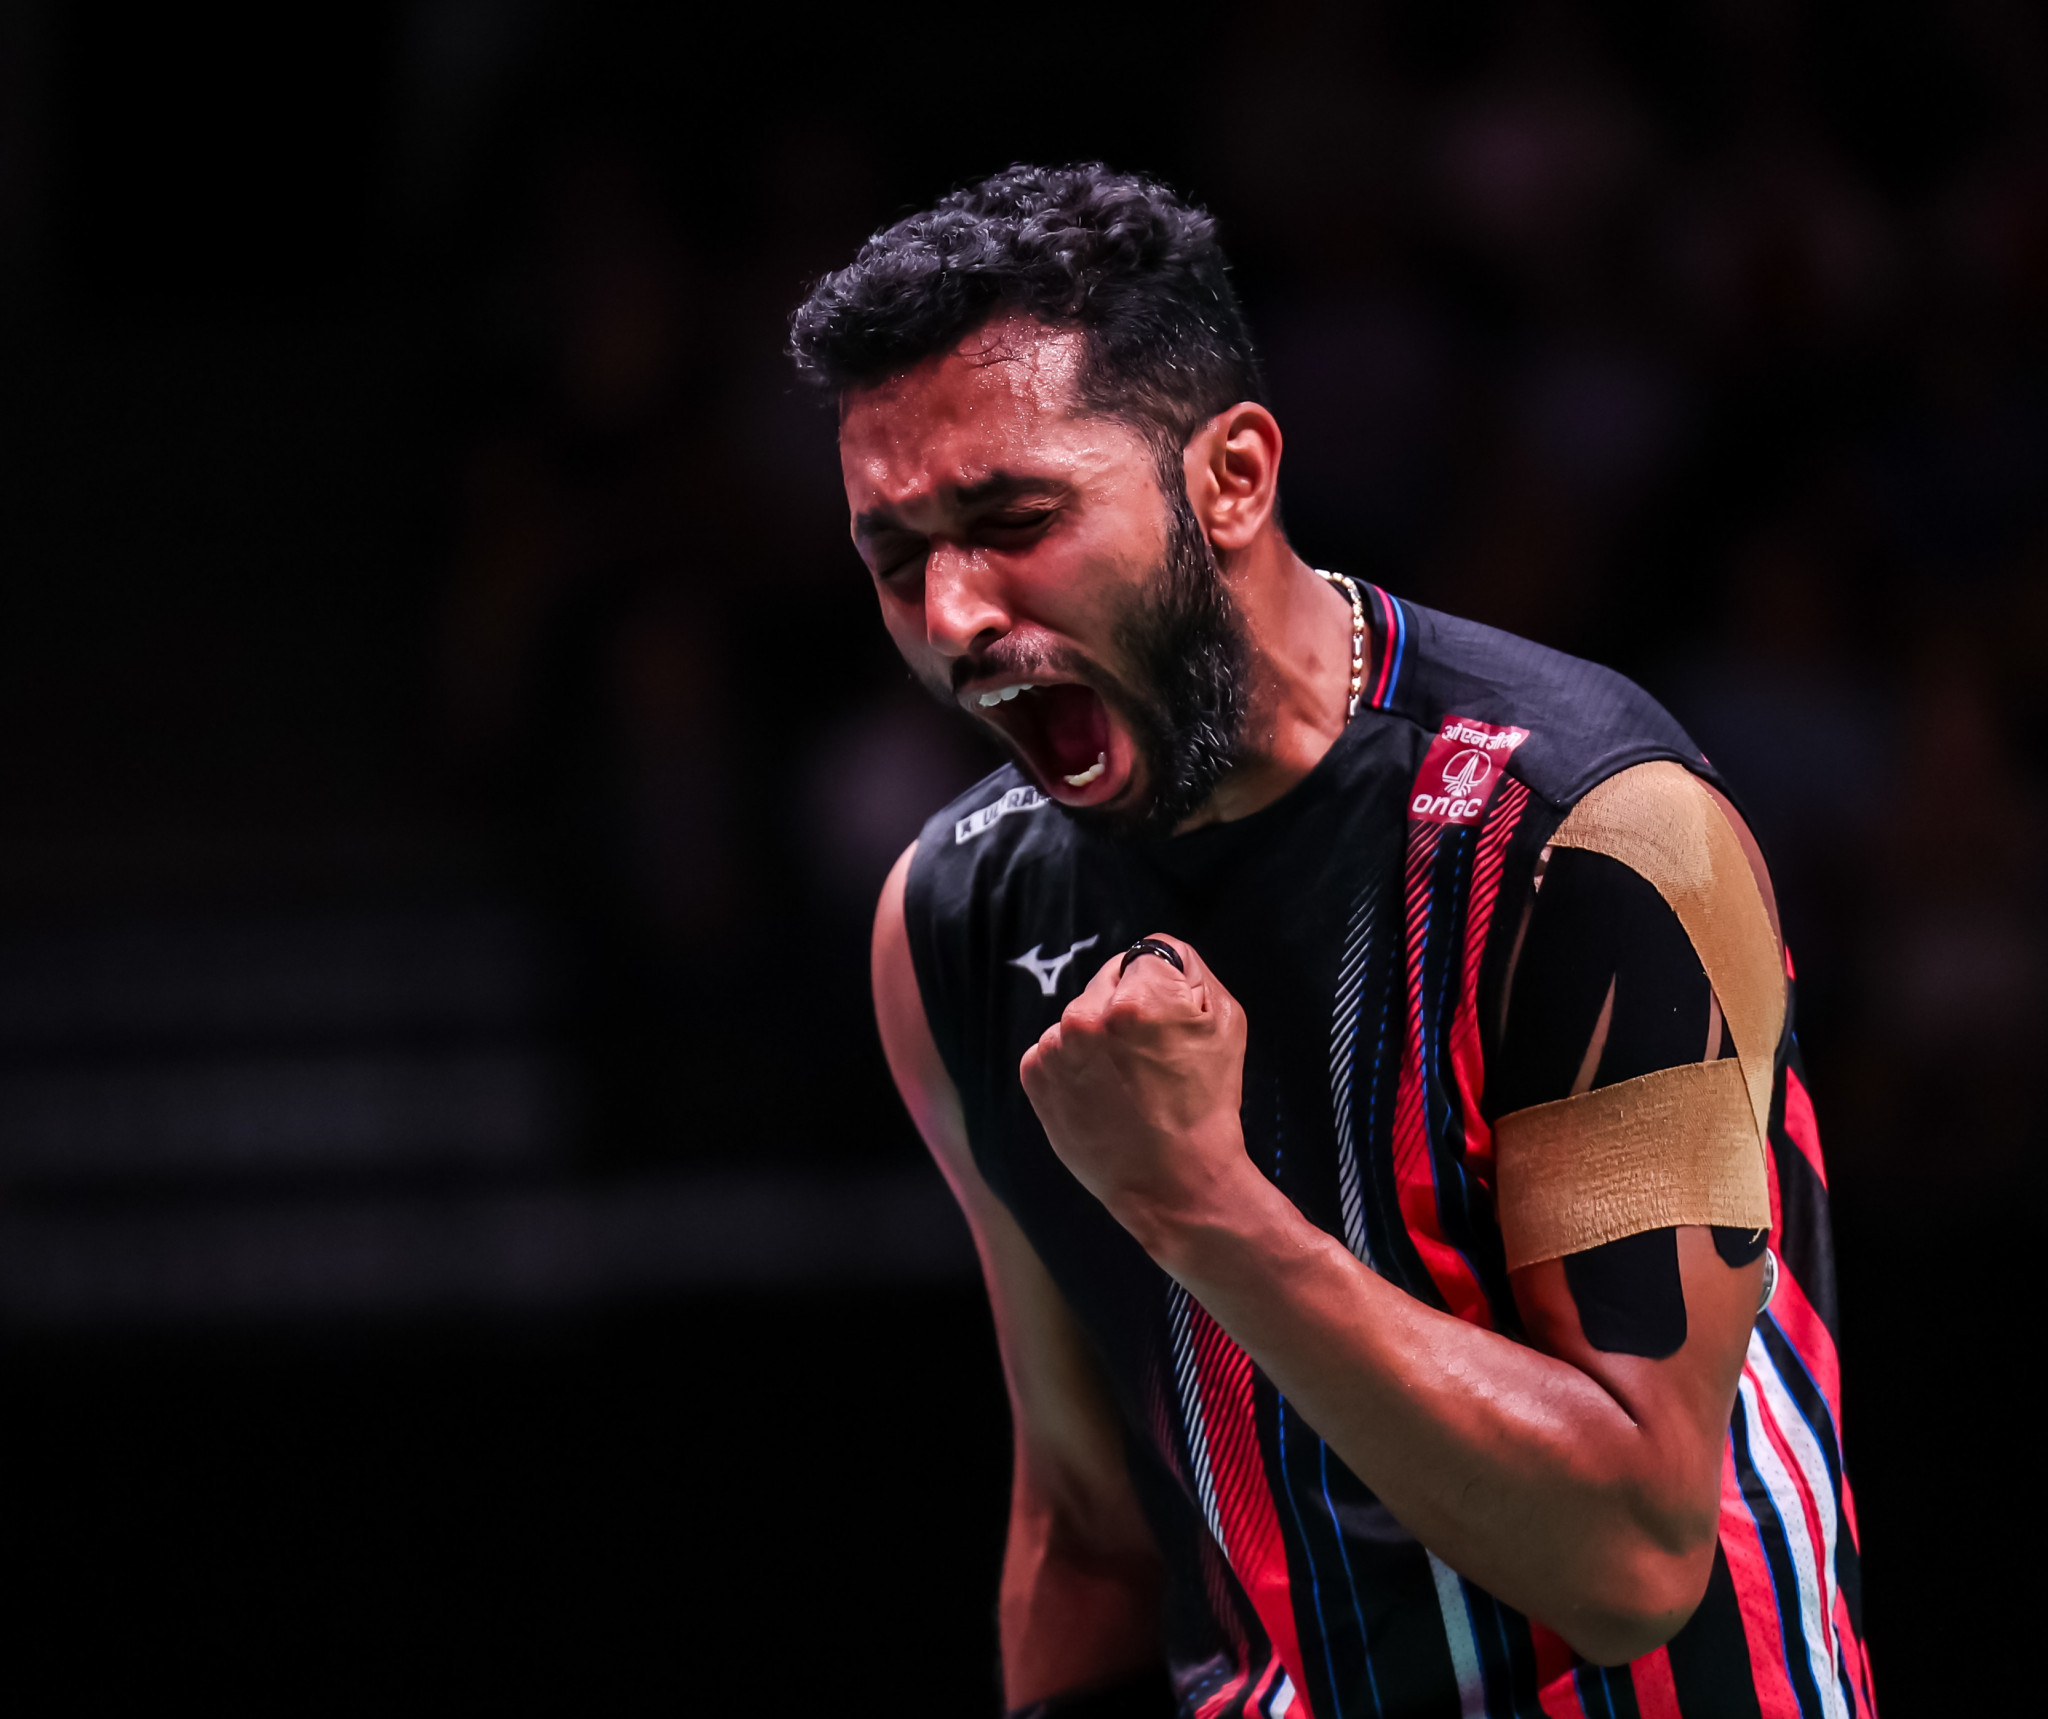 Prannoy roars to victory to set up Axelsen clash at BWF World Championships